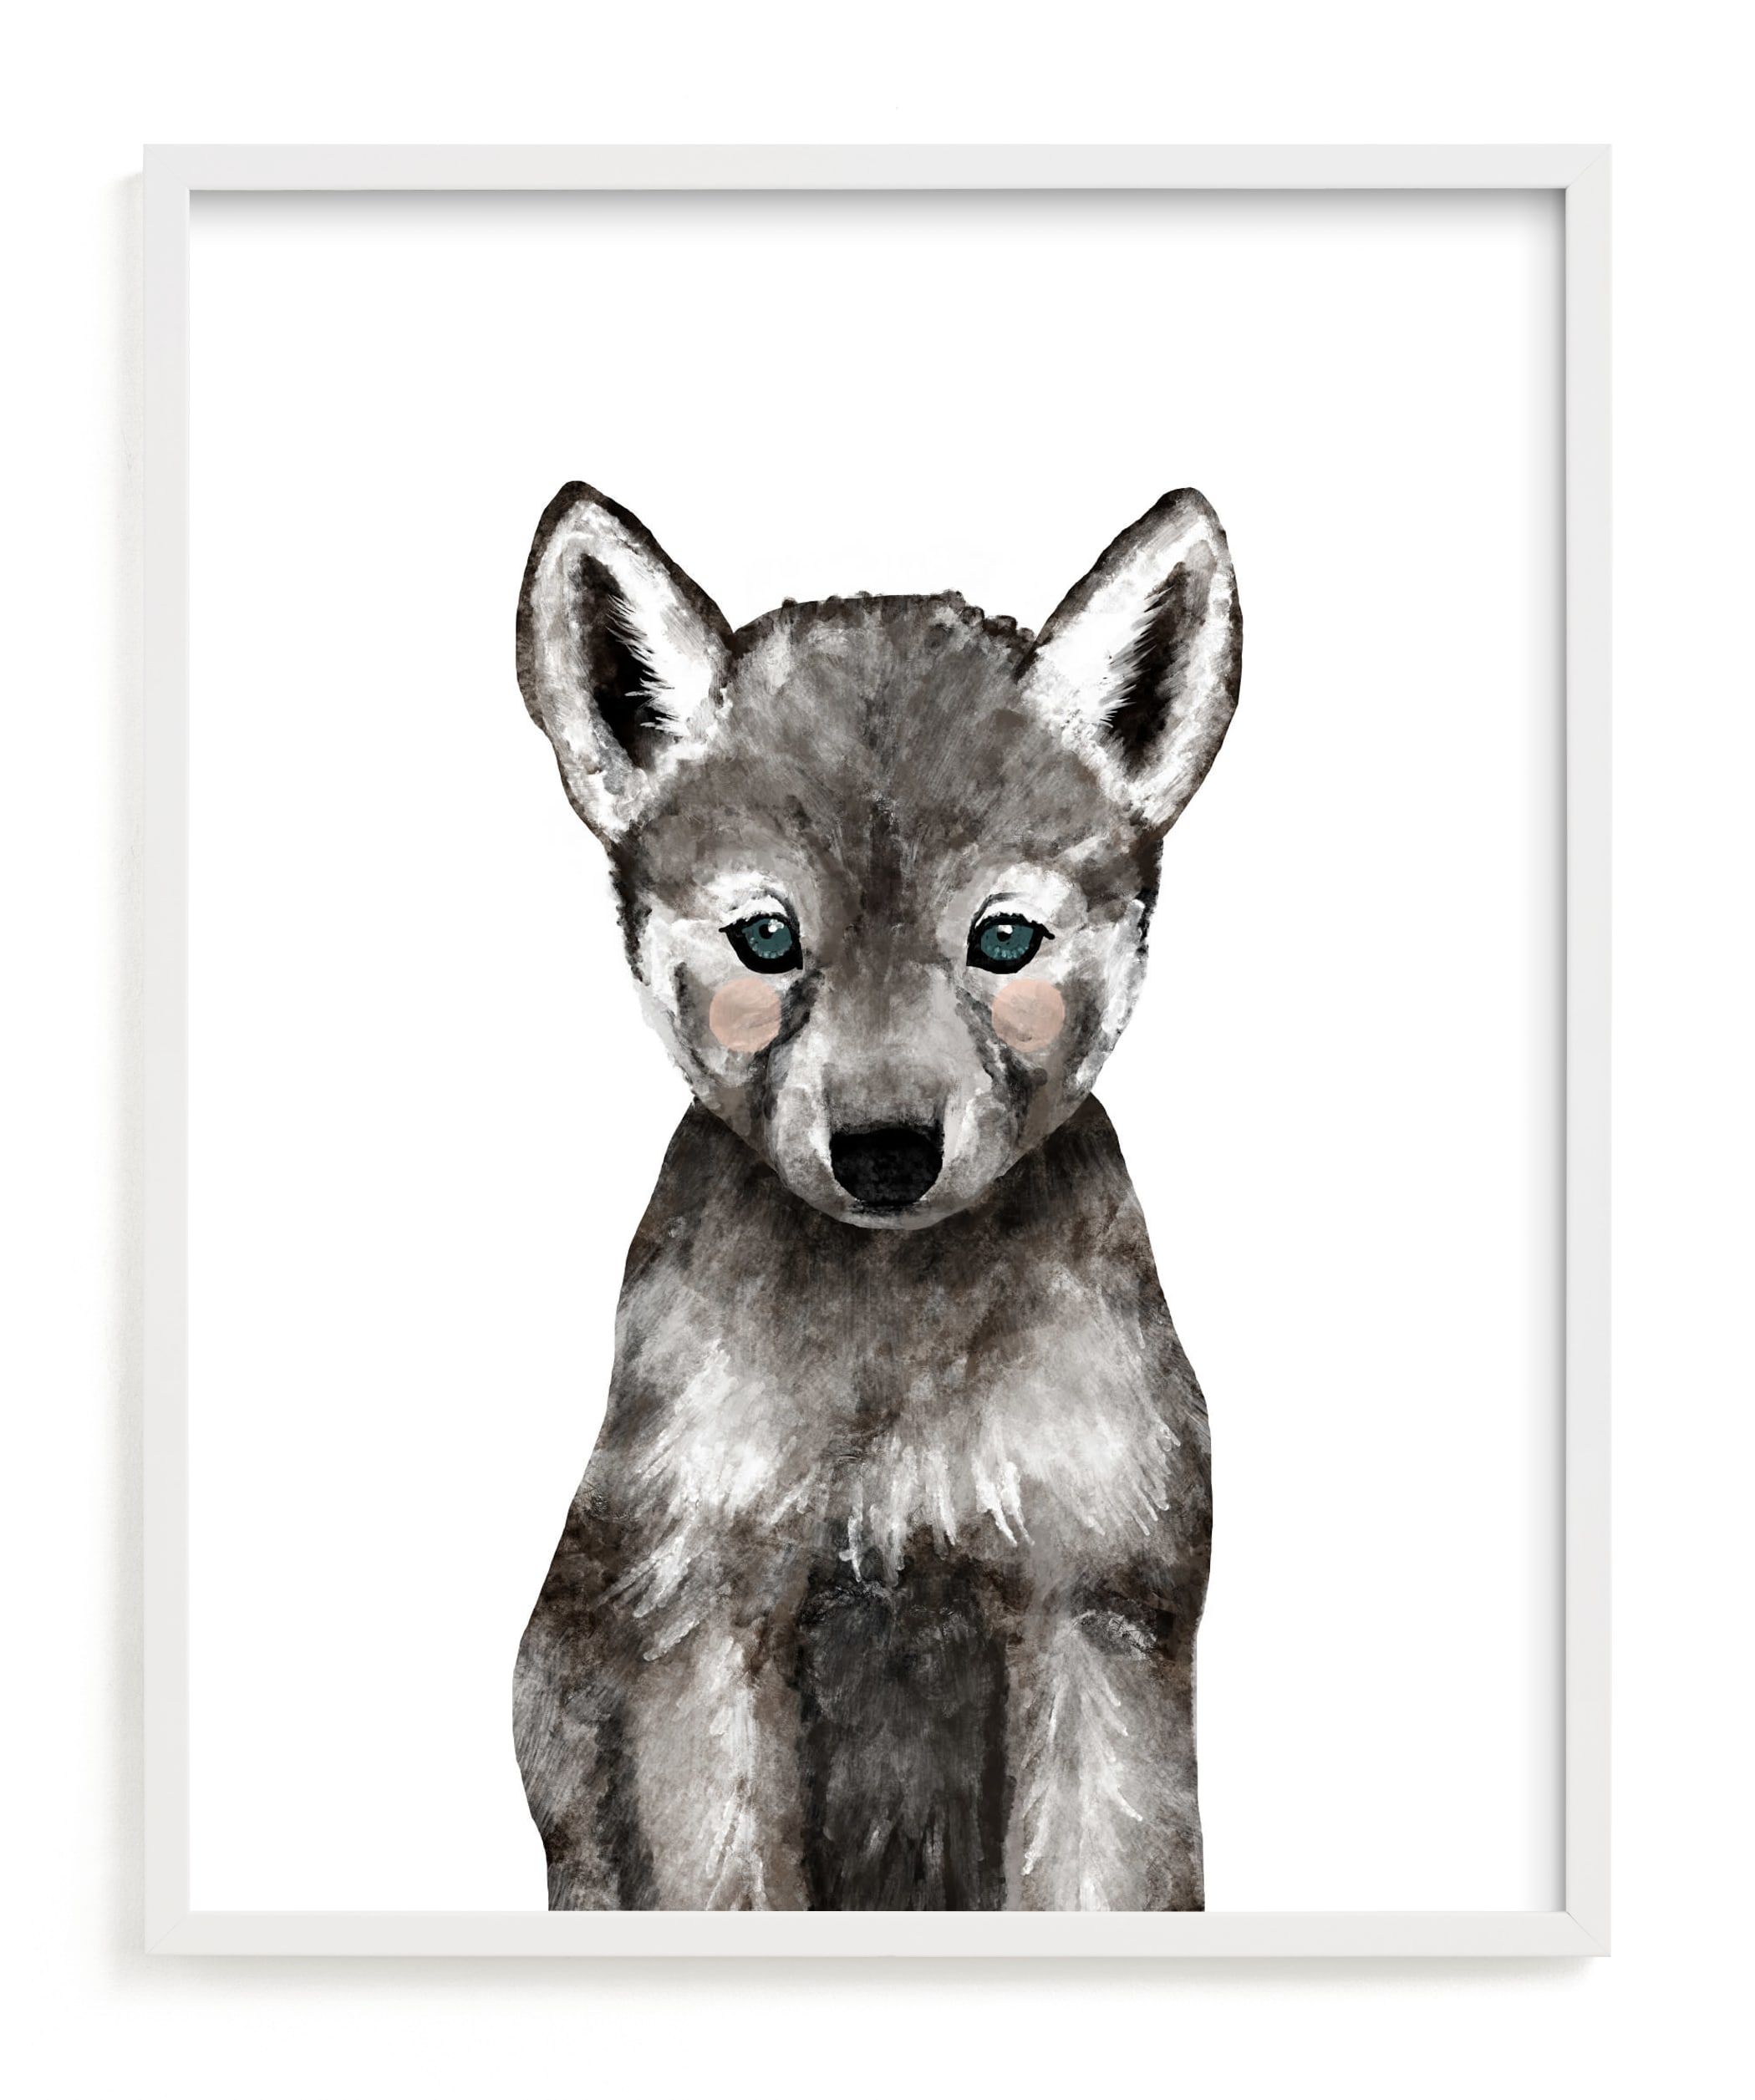 "Baby Animal Wolf" - Art Print by Cass Loh. | Minted